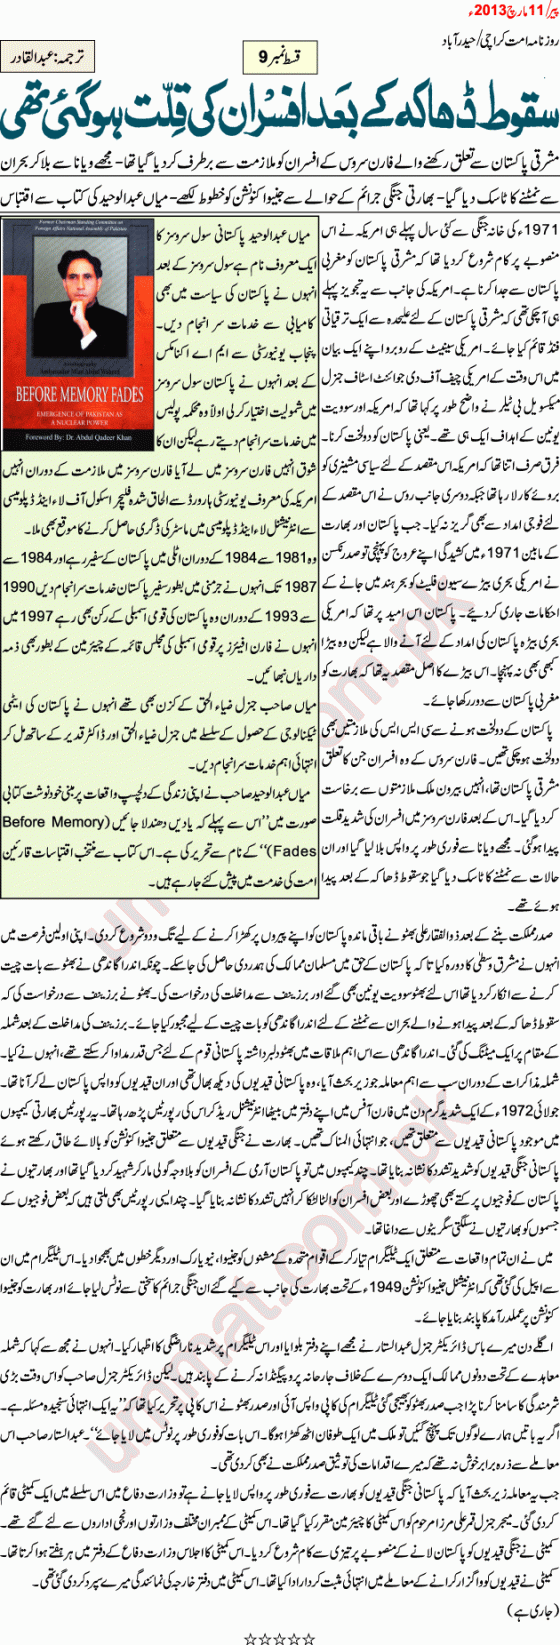 Pakistan's Journey towards Atom Bomb-9_We had run short of Officers after Fall of Dhaka